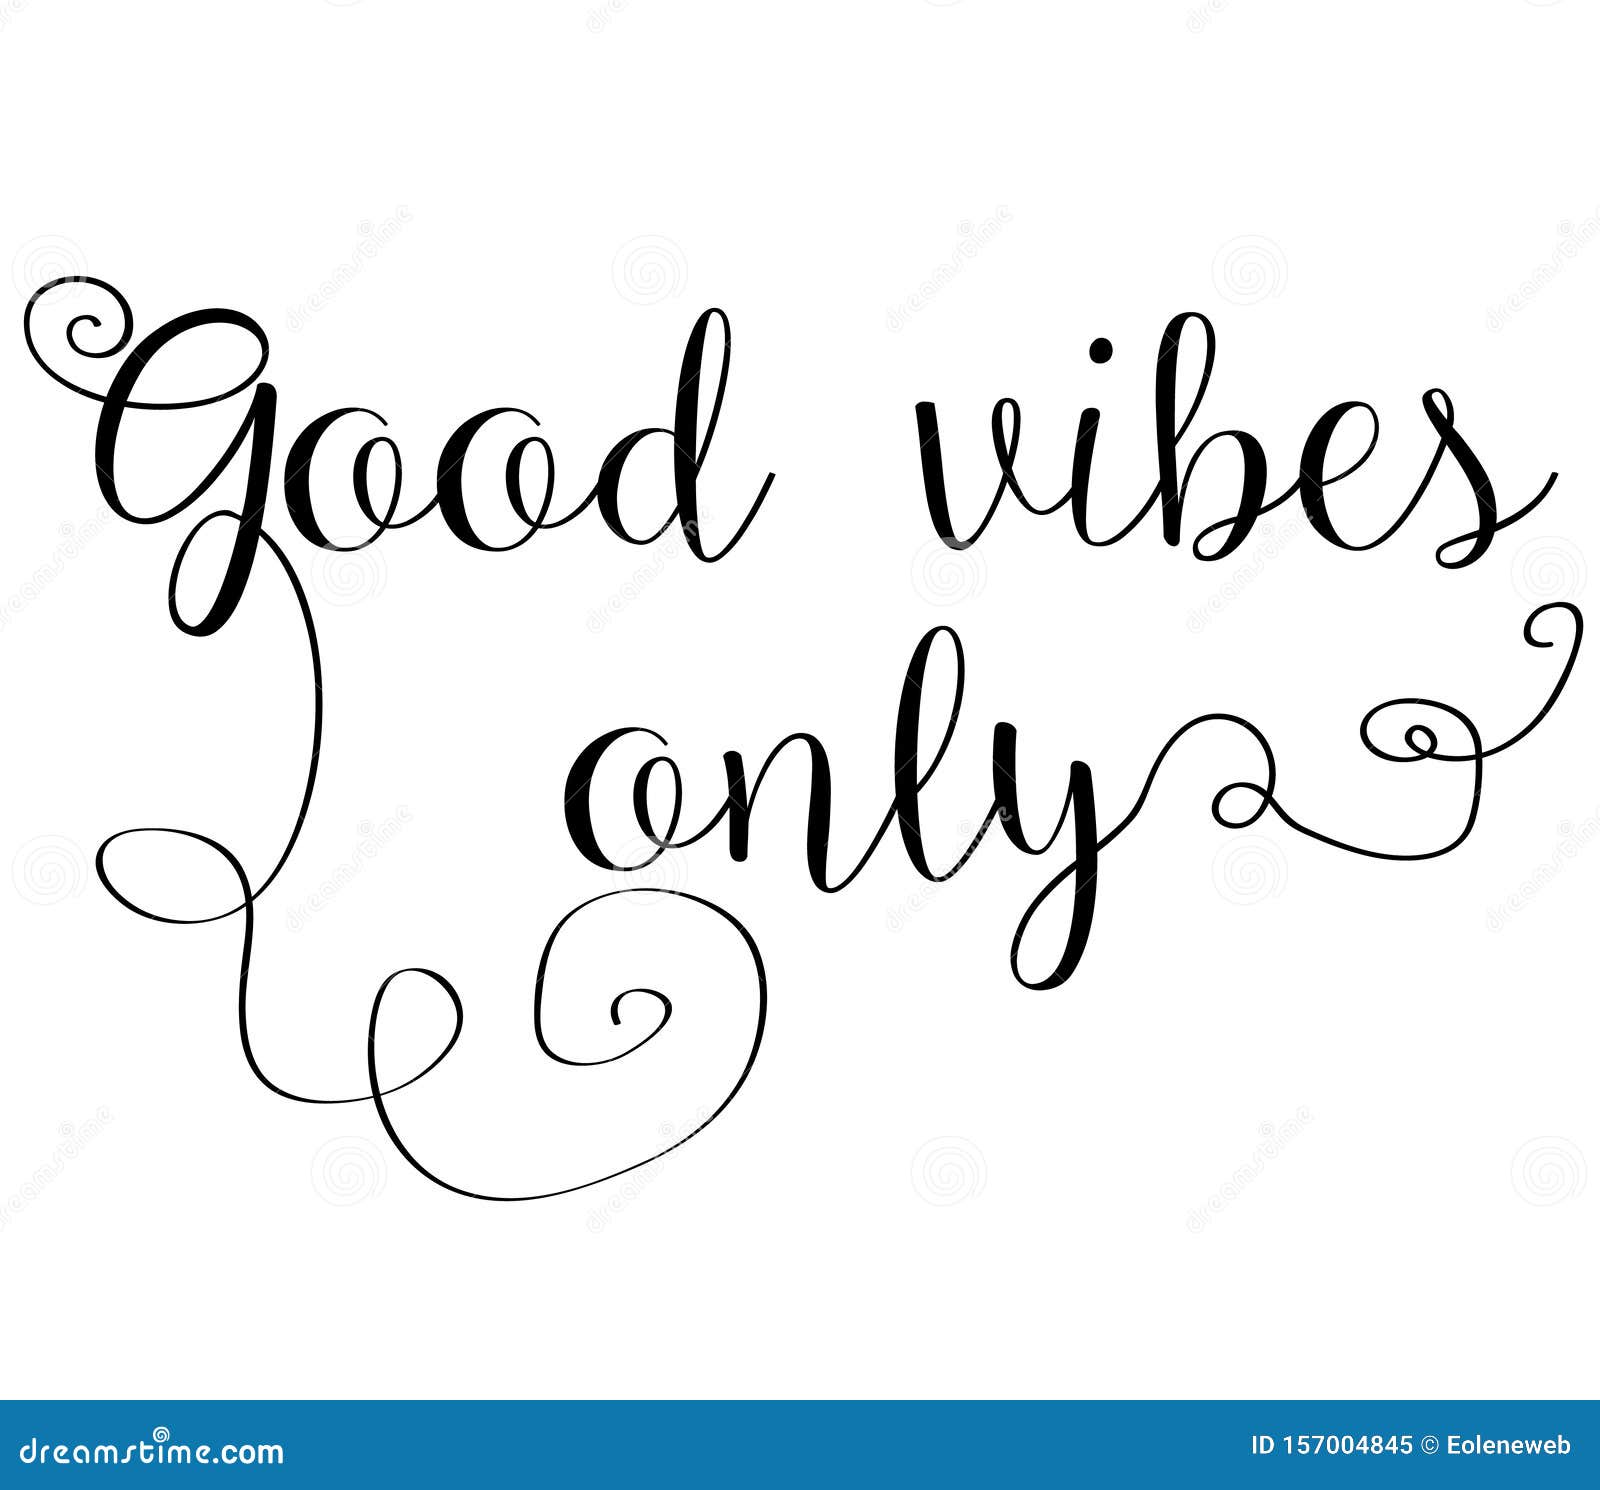 Good Vibes only Hand Written Calligraphy Quote Motivation Stock Vector ...